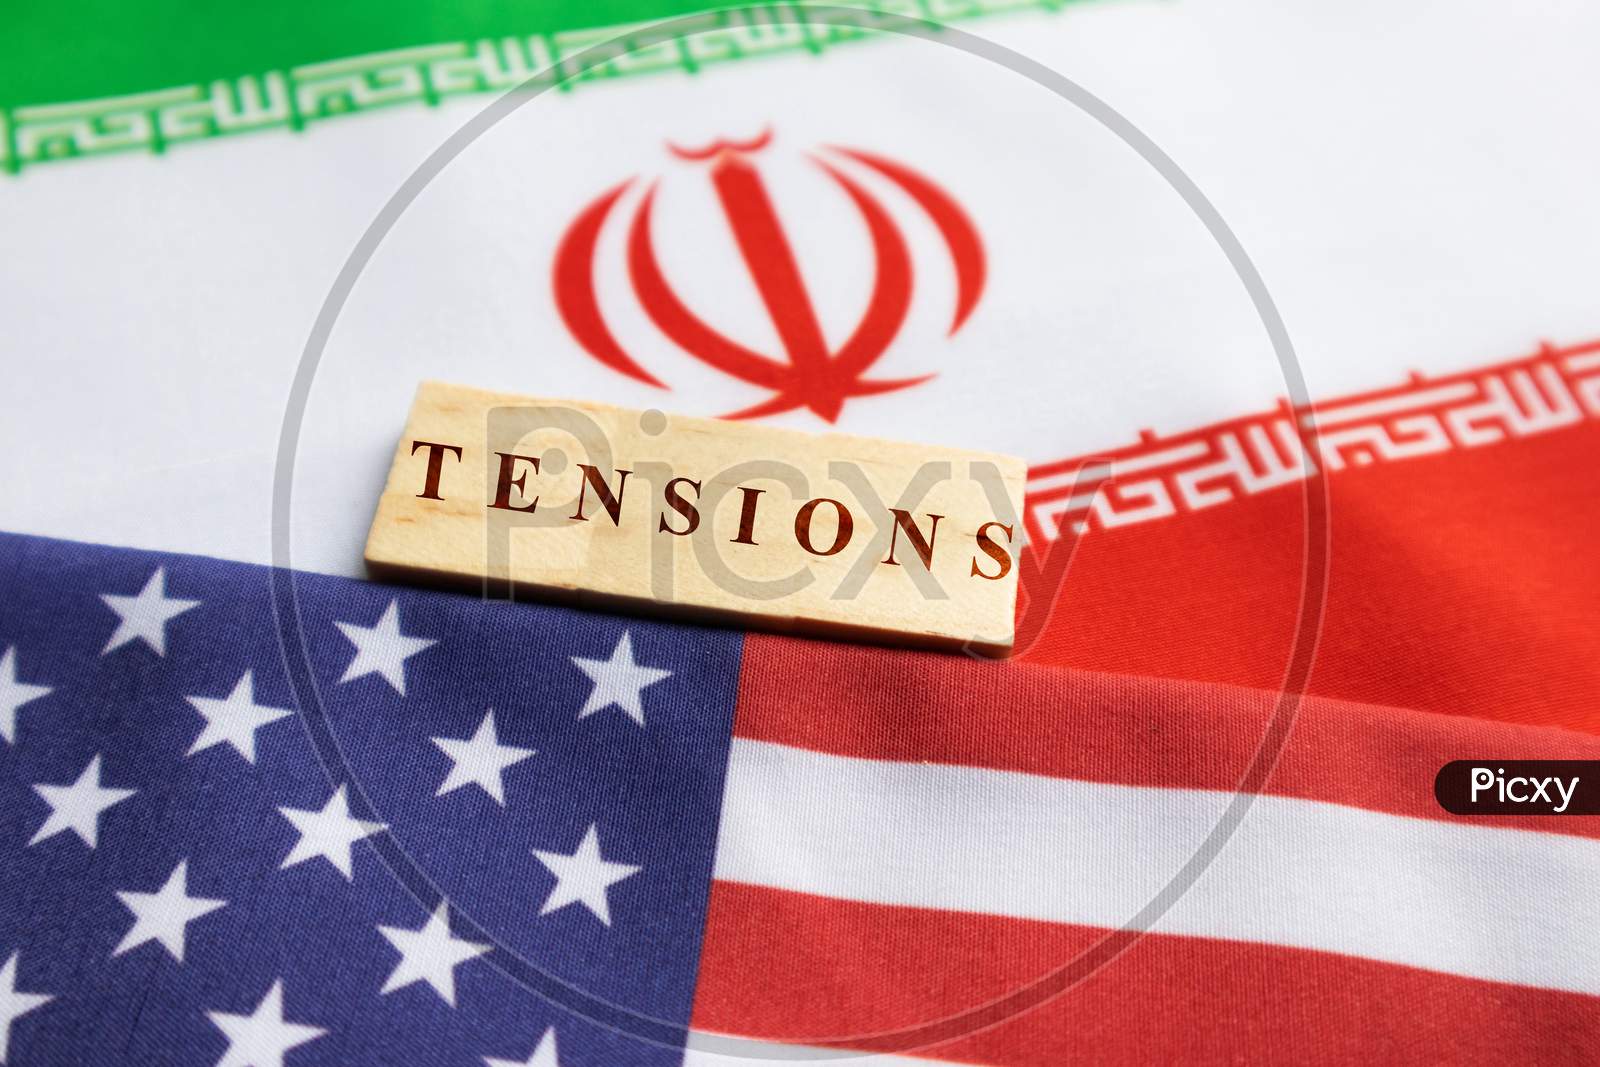 Concept Of Bilateral Relations Of Us And Iran Showing With Flag And War With Wooden Block Letters